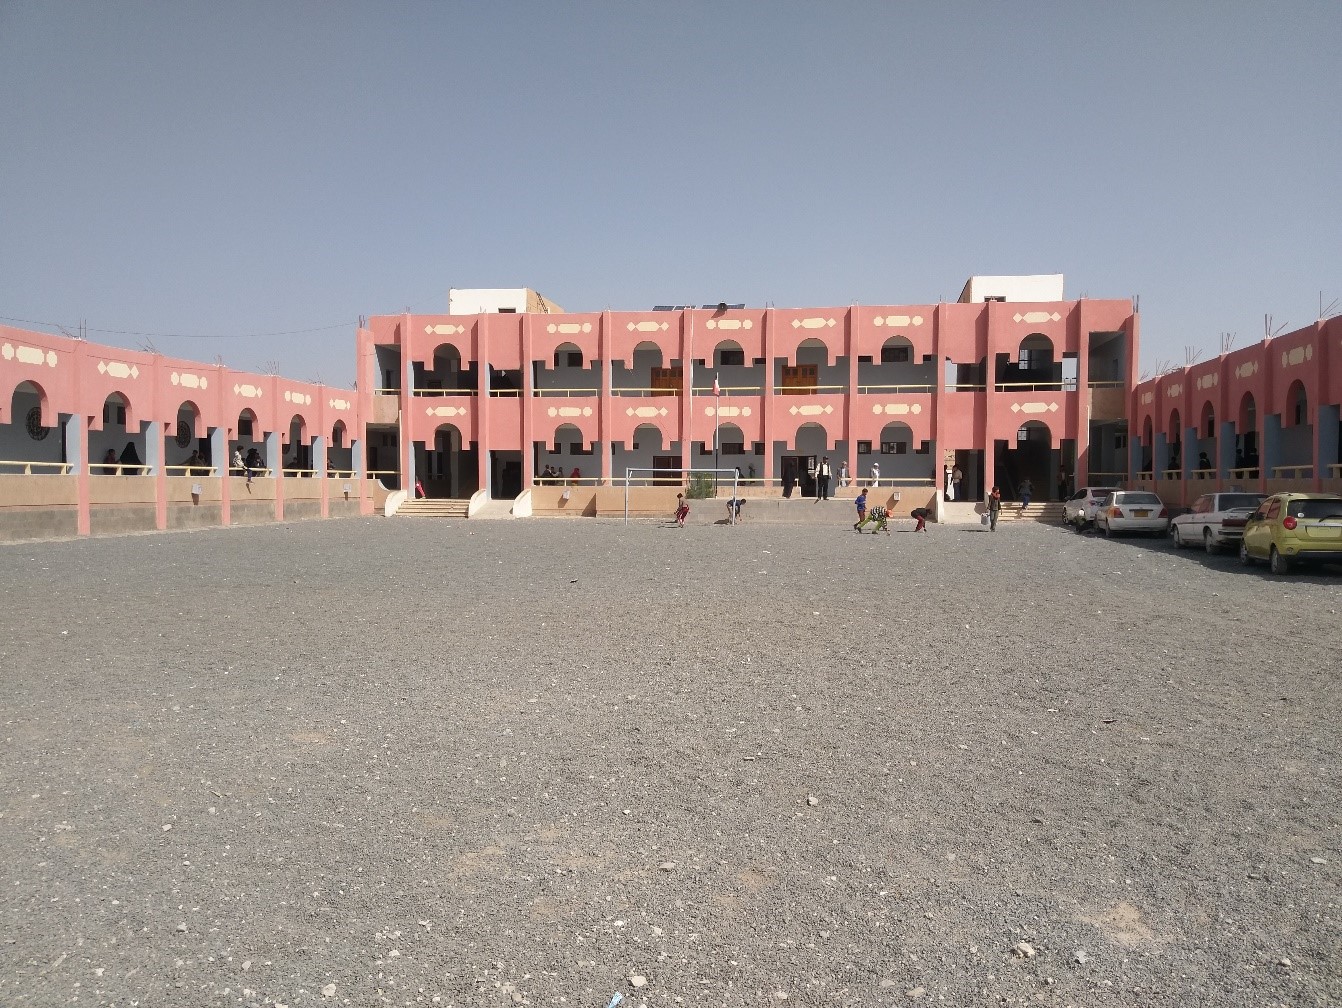 A building with many windows and a gravel area